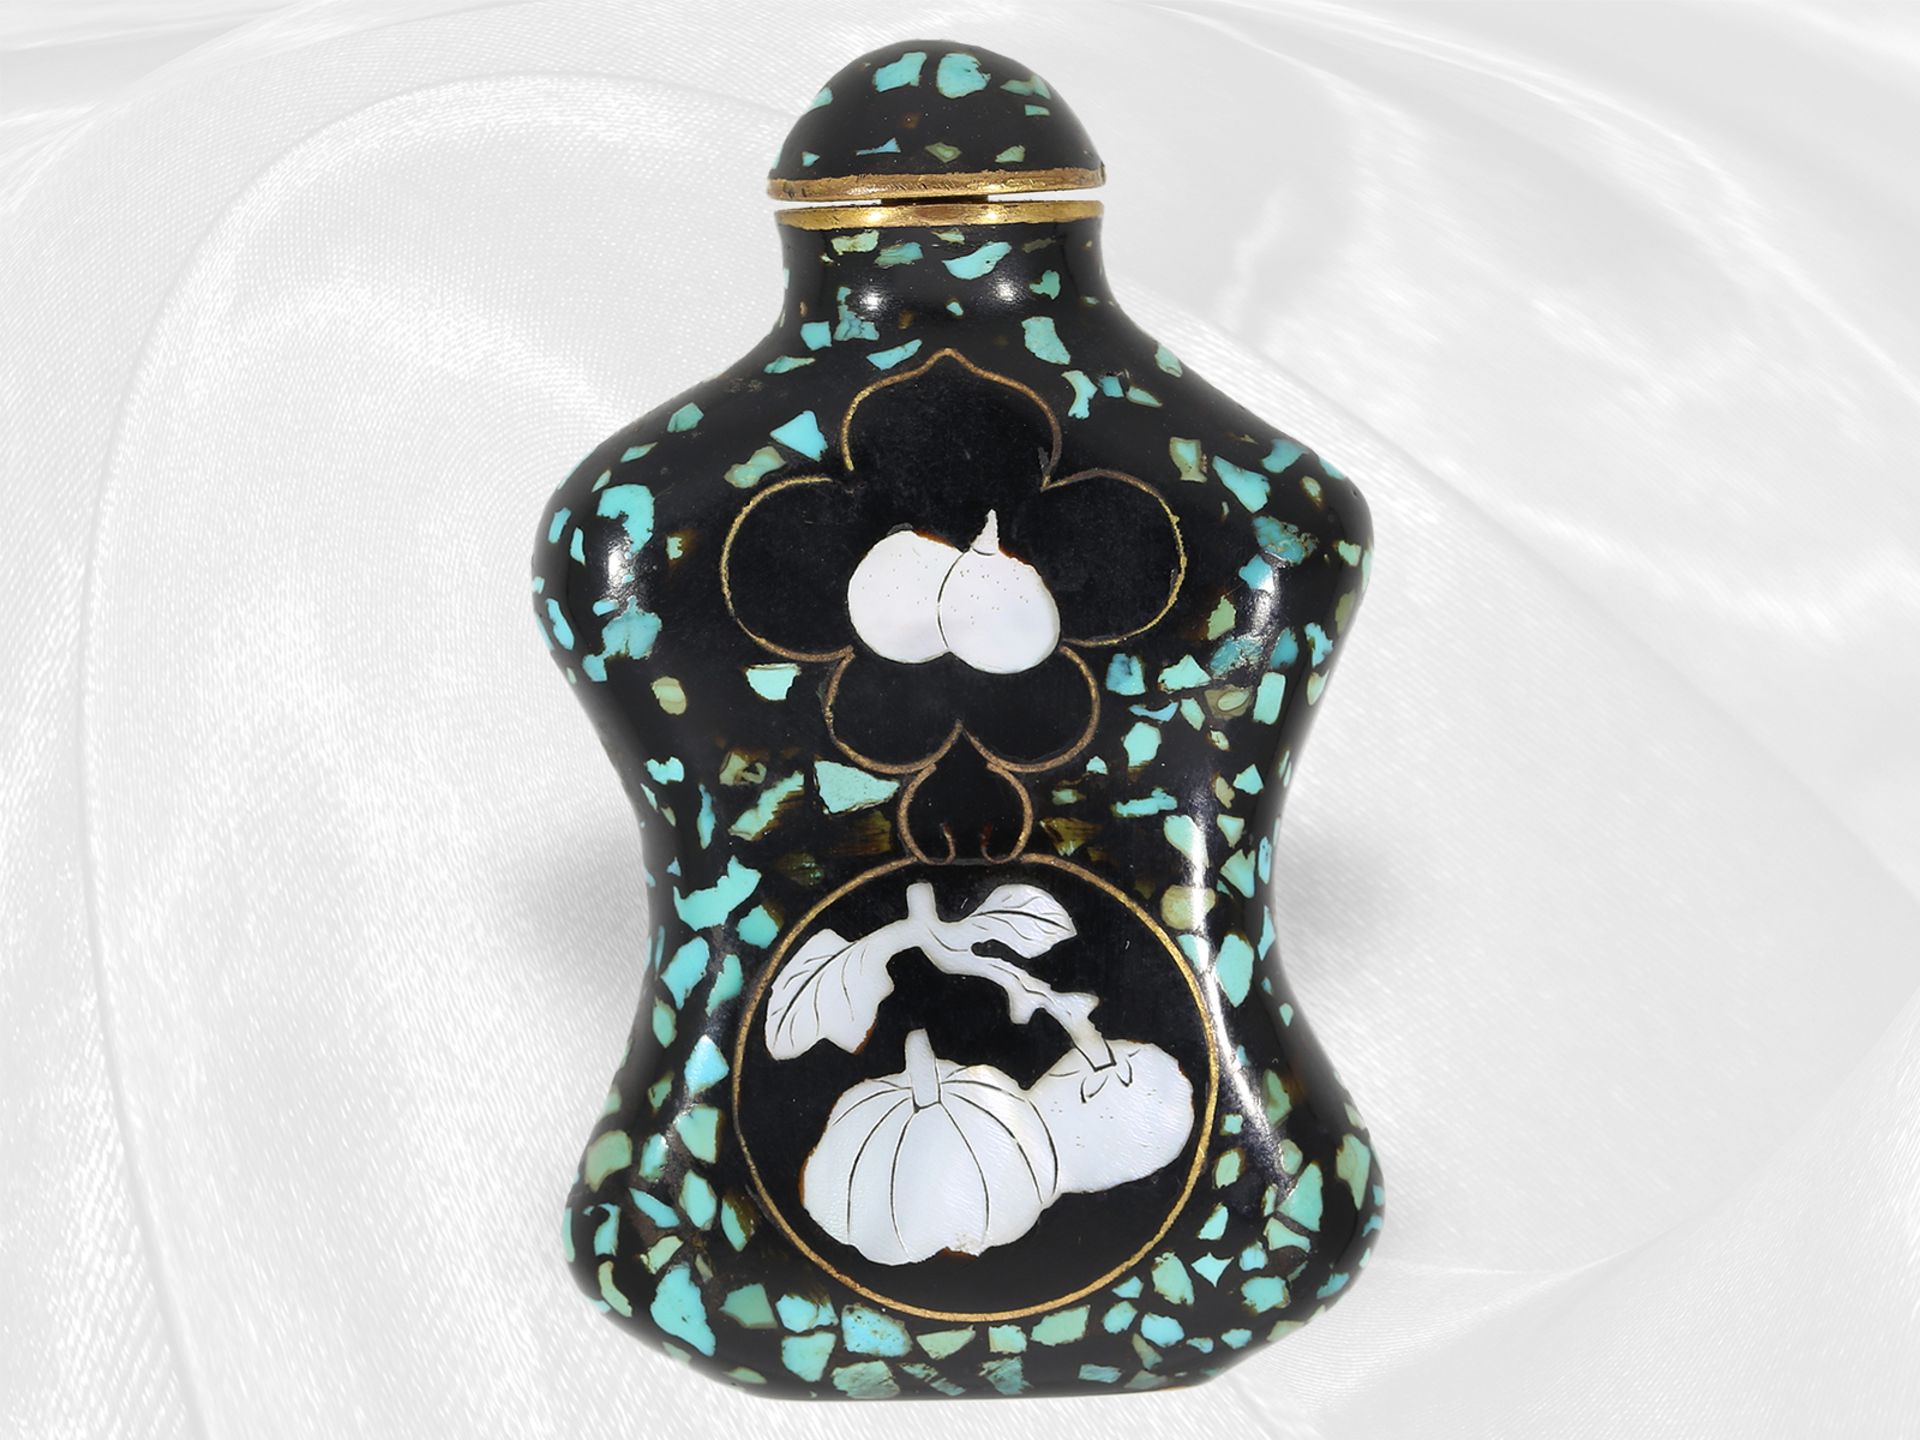 Decorative antique perfume flacon of brass, mother-of-pearl and enamel, probably around 1900 - Image 3 of 7